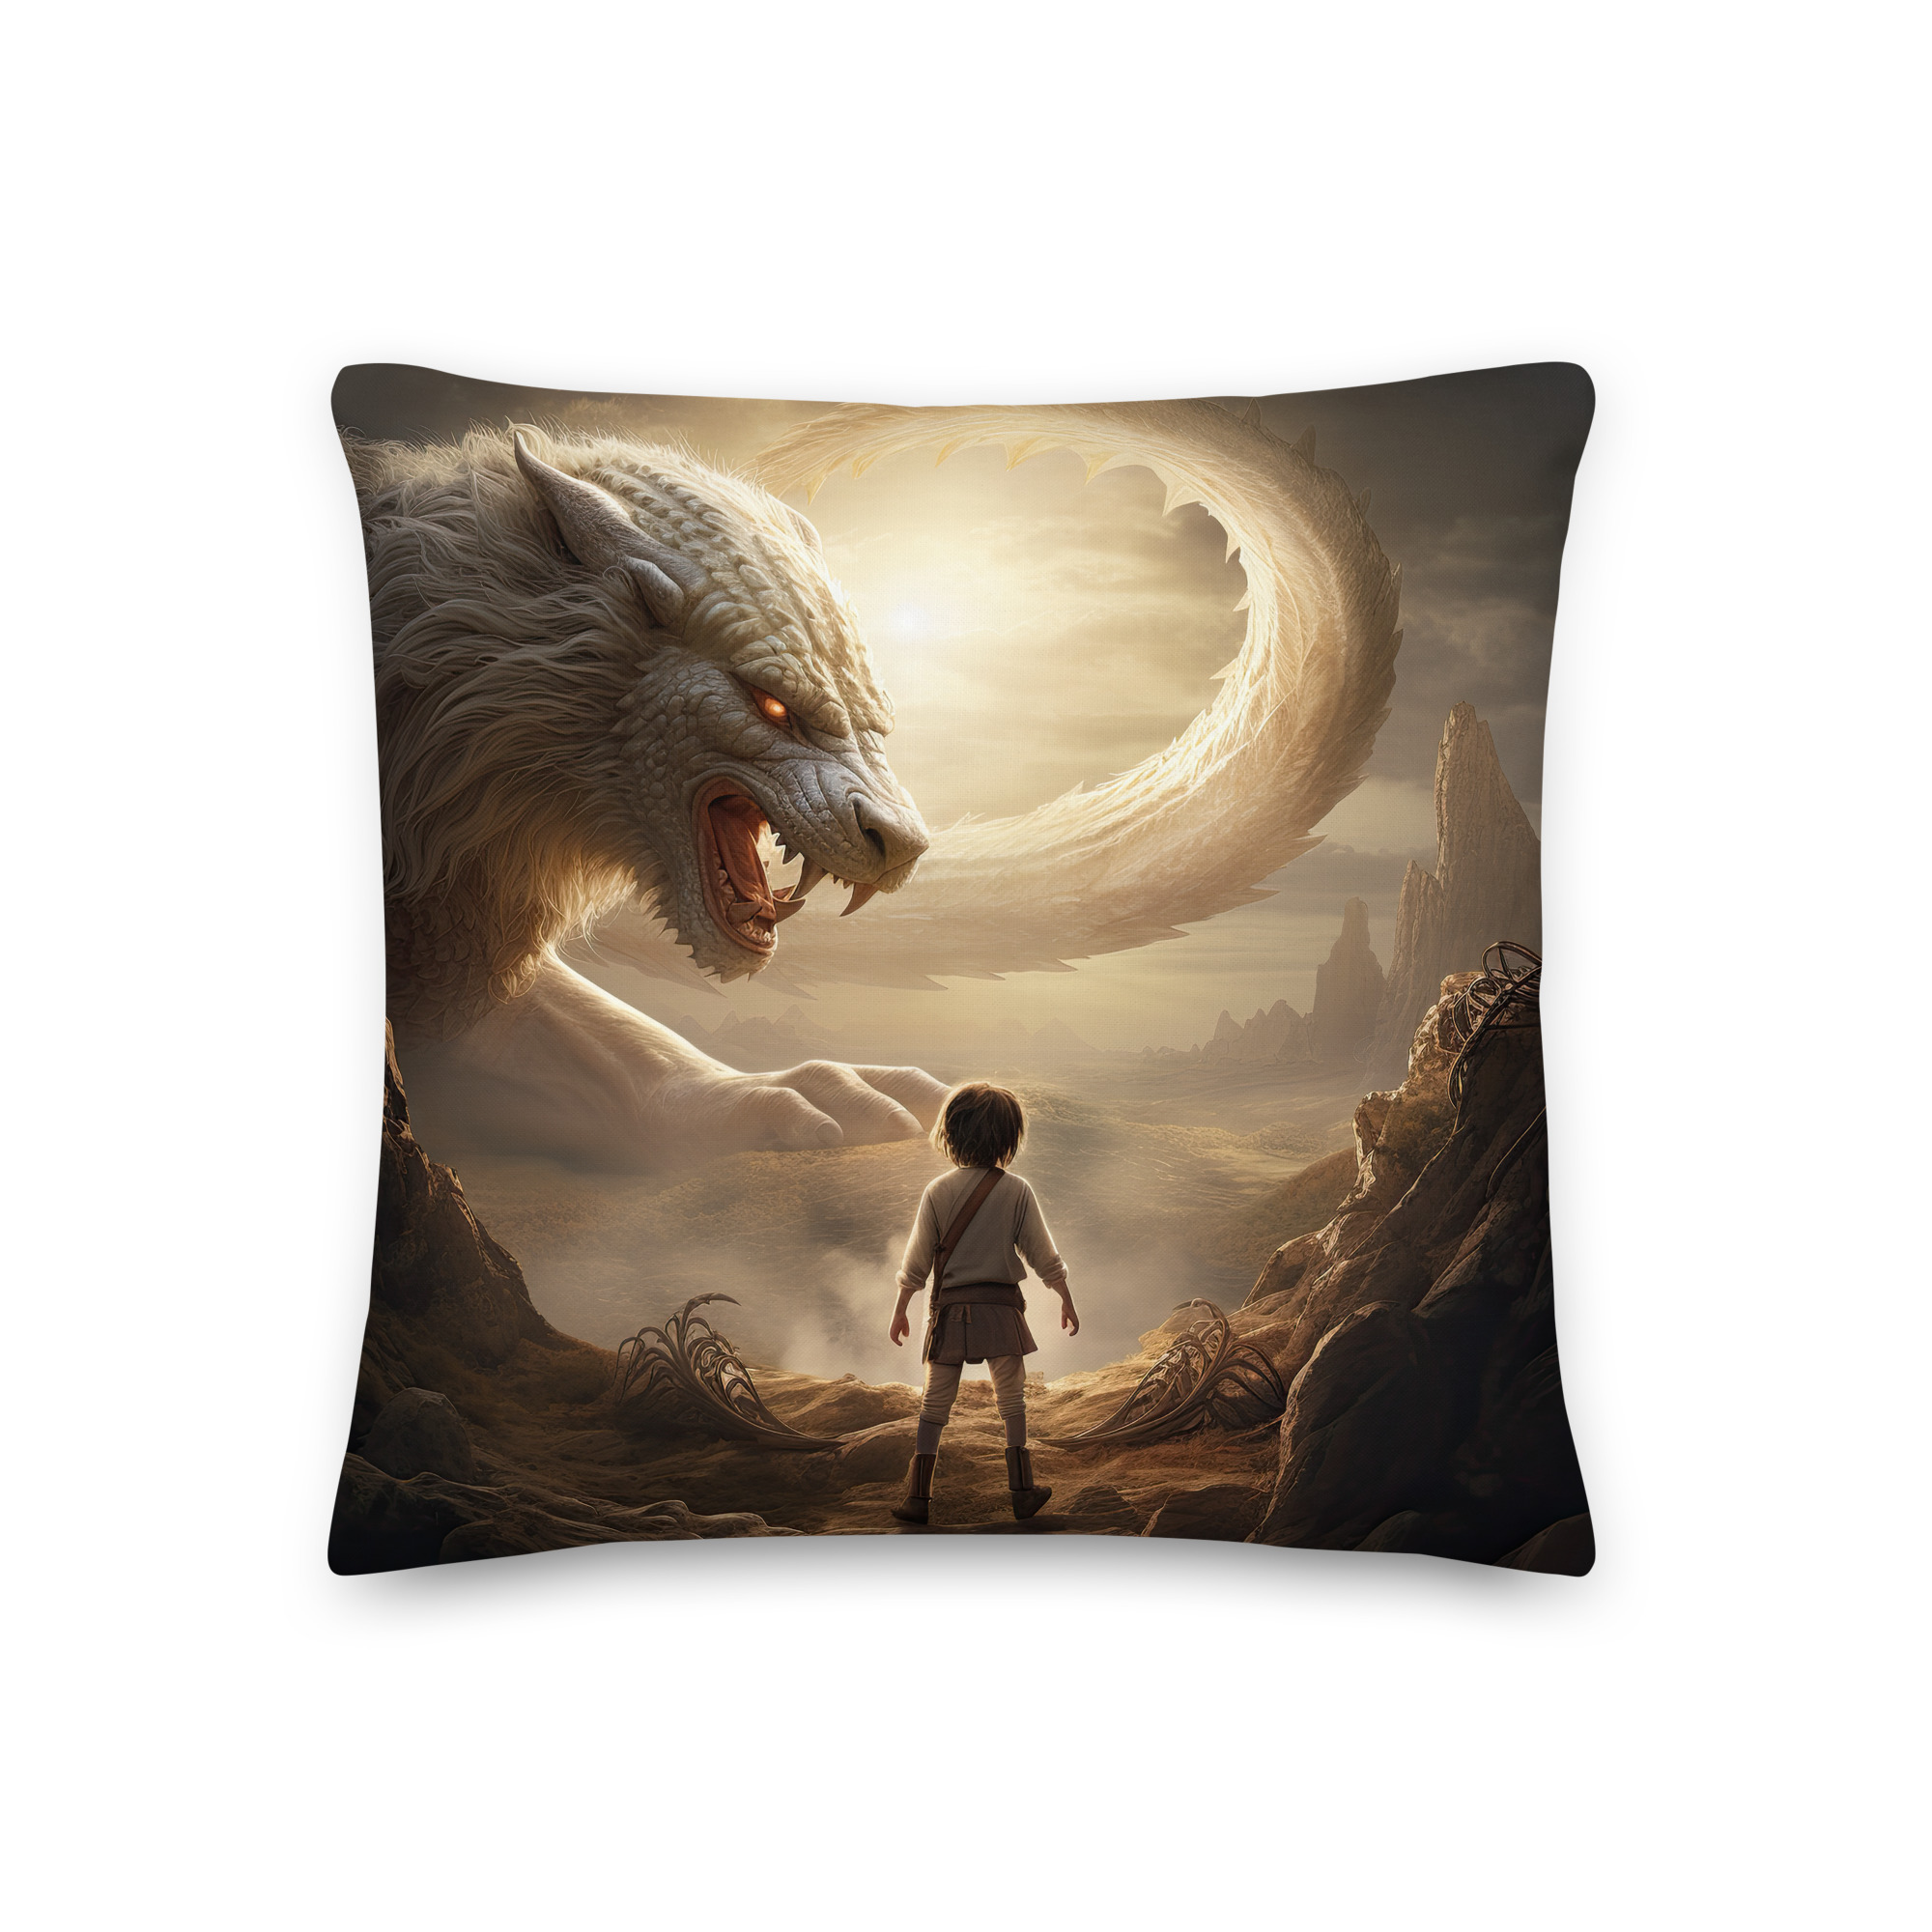 The Boy and the Chimera Throw Pillow – 18×18